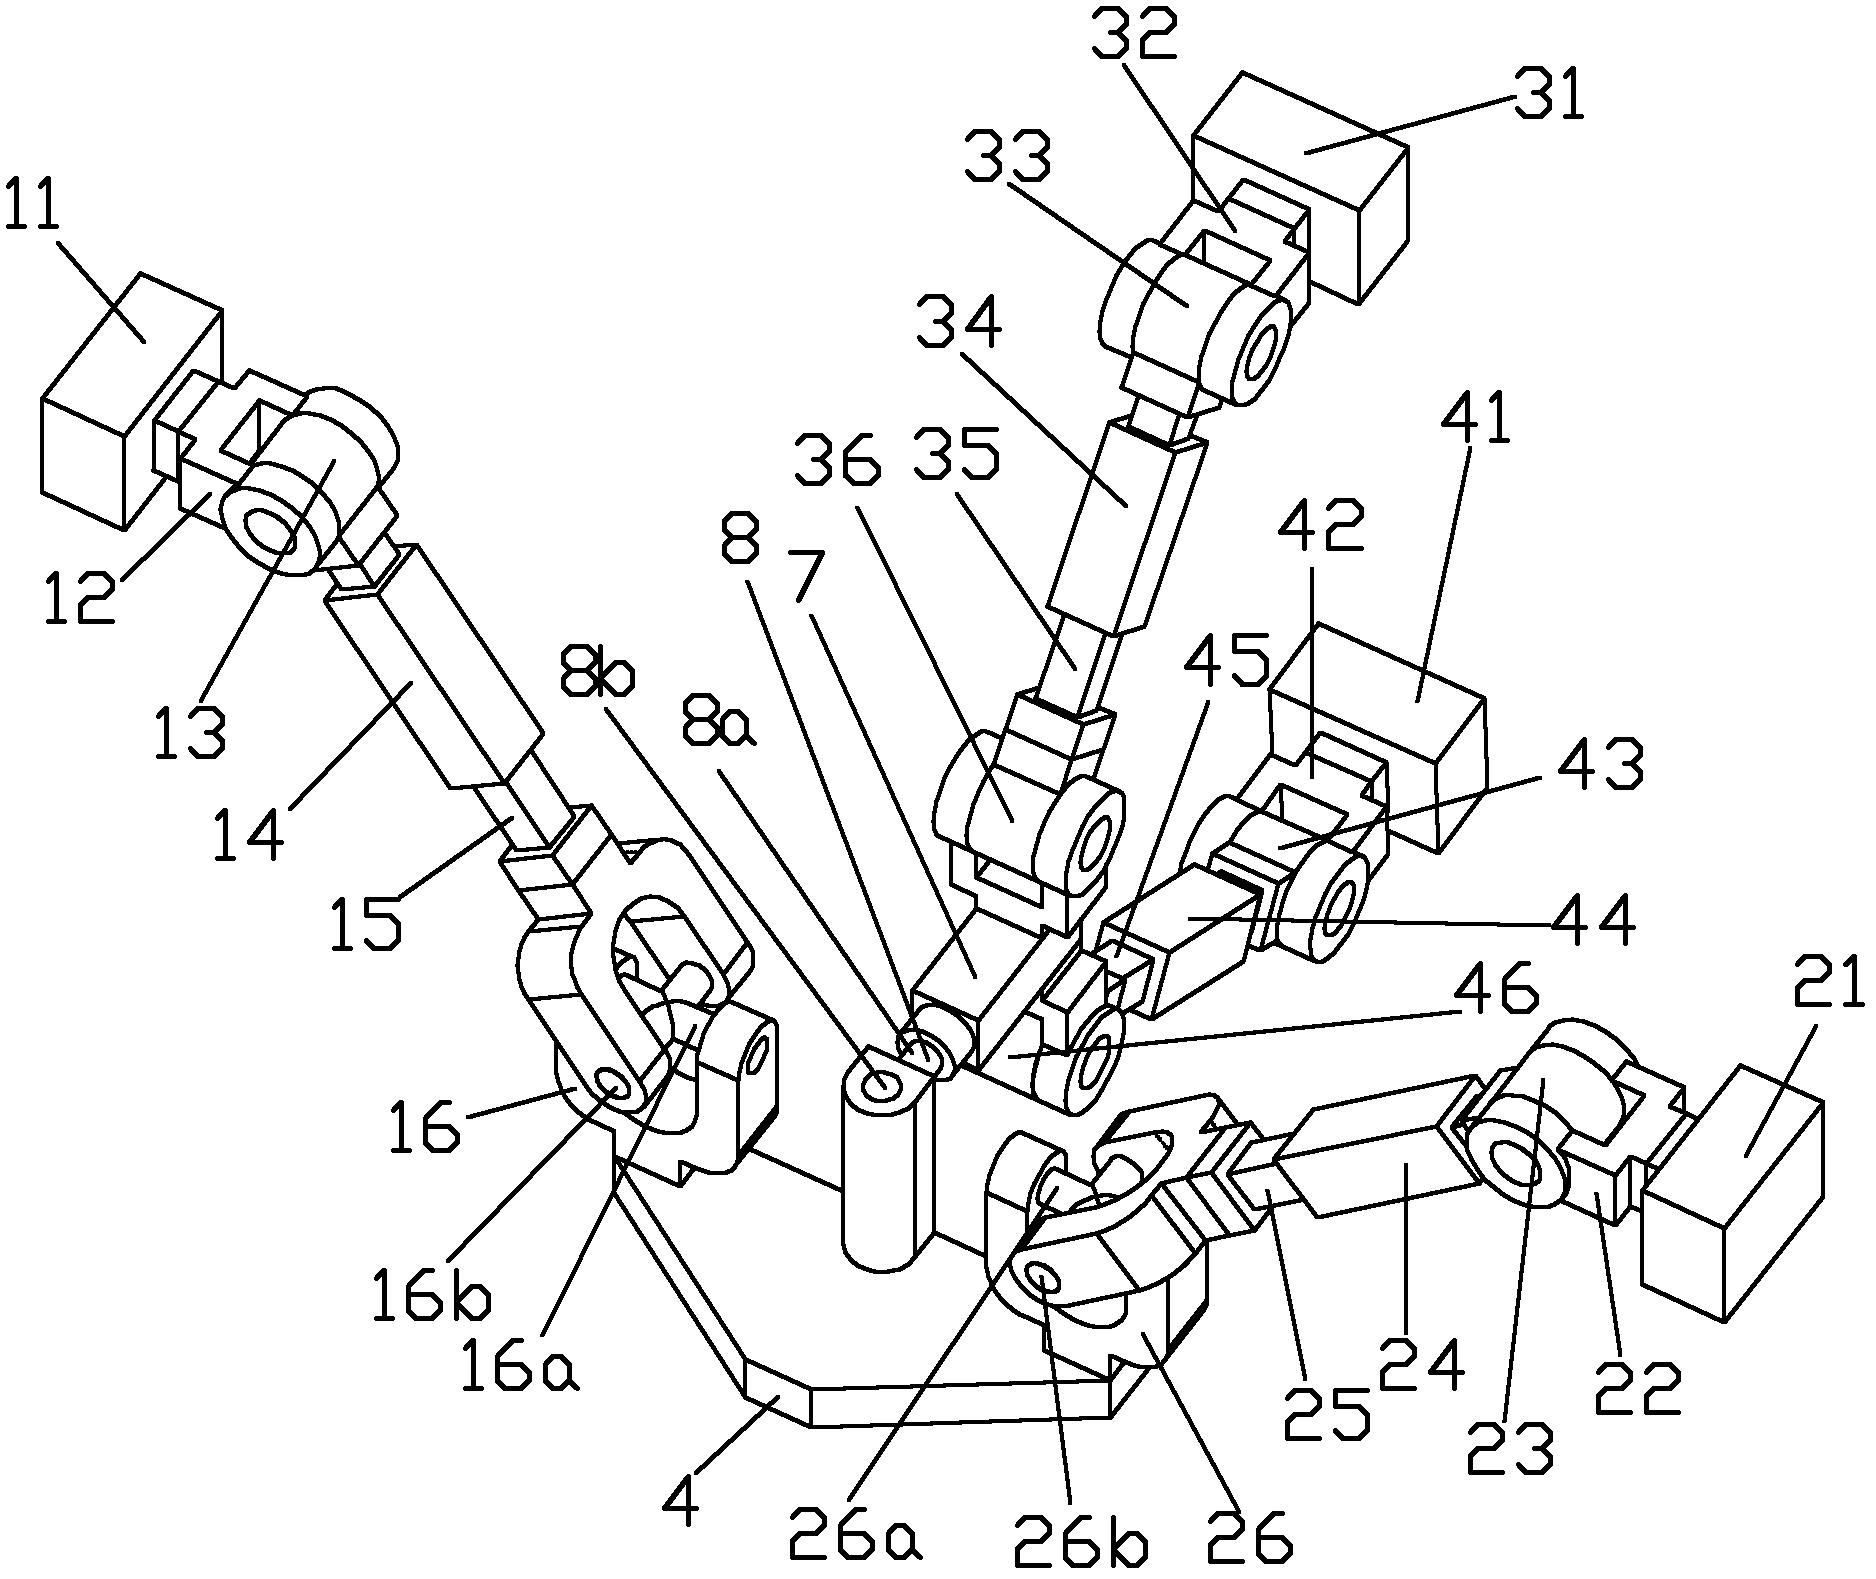 High-rigidity redundantly-actuated three-degree-of-freedom parallel mechanism